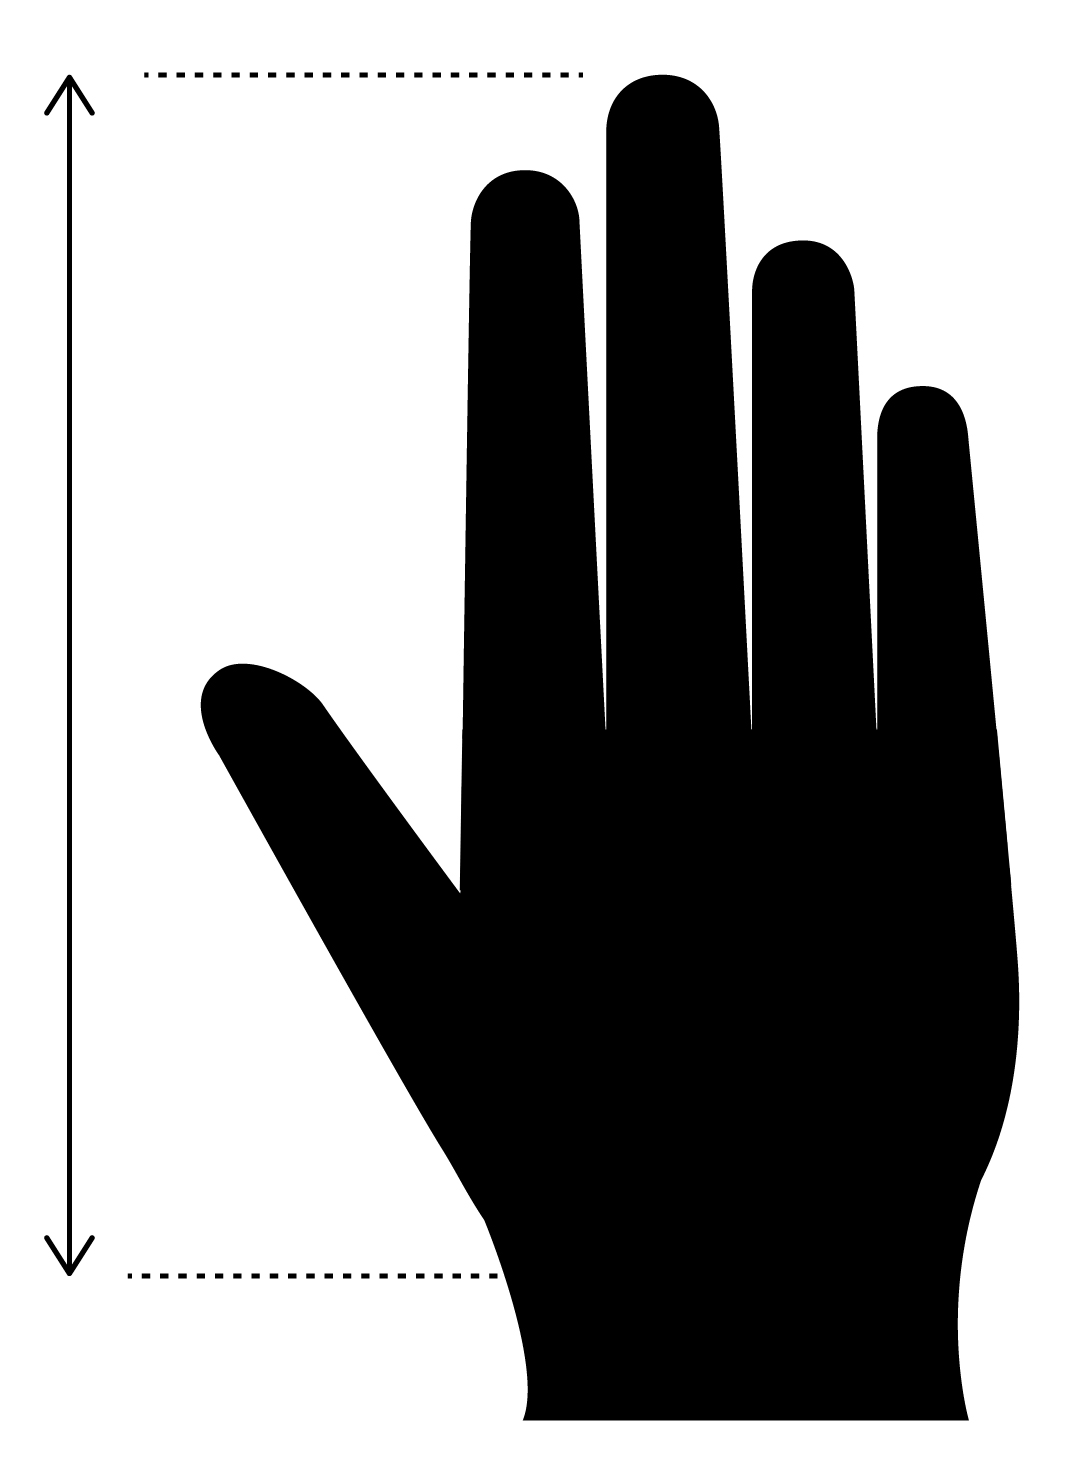 Measure from top of middle finger to base of hand